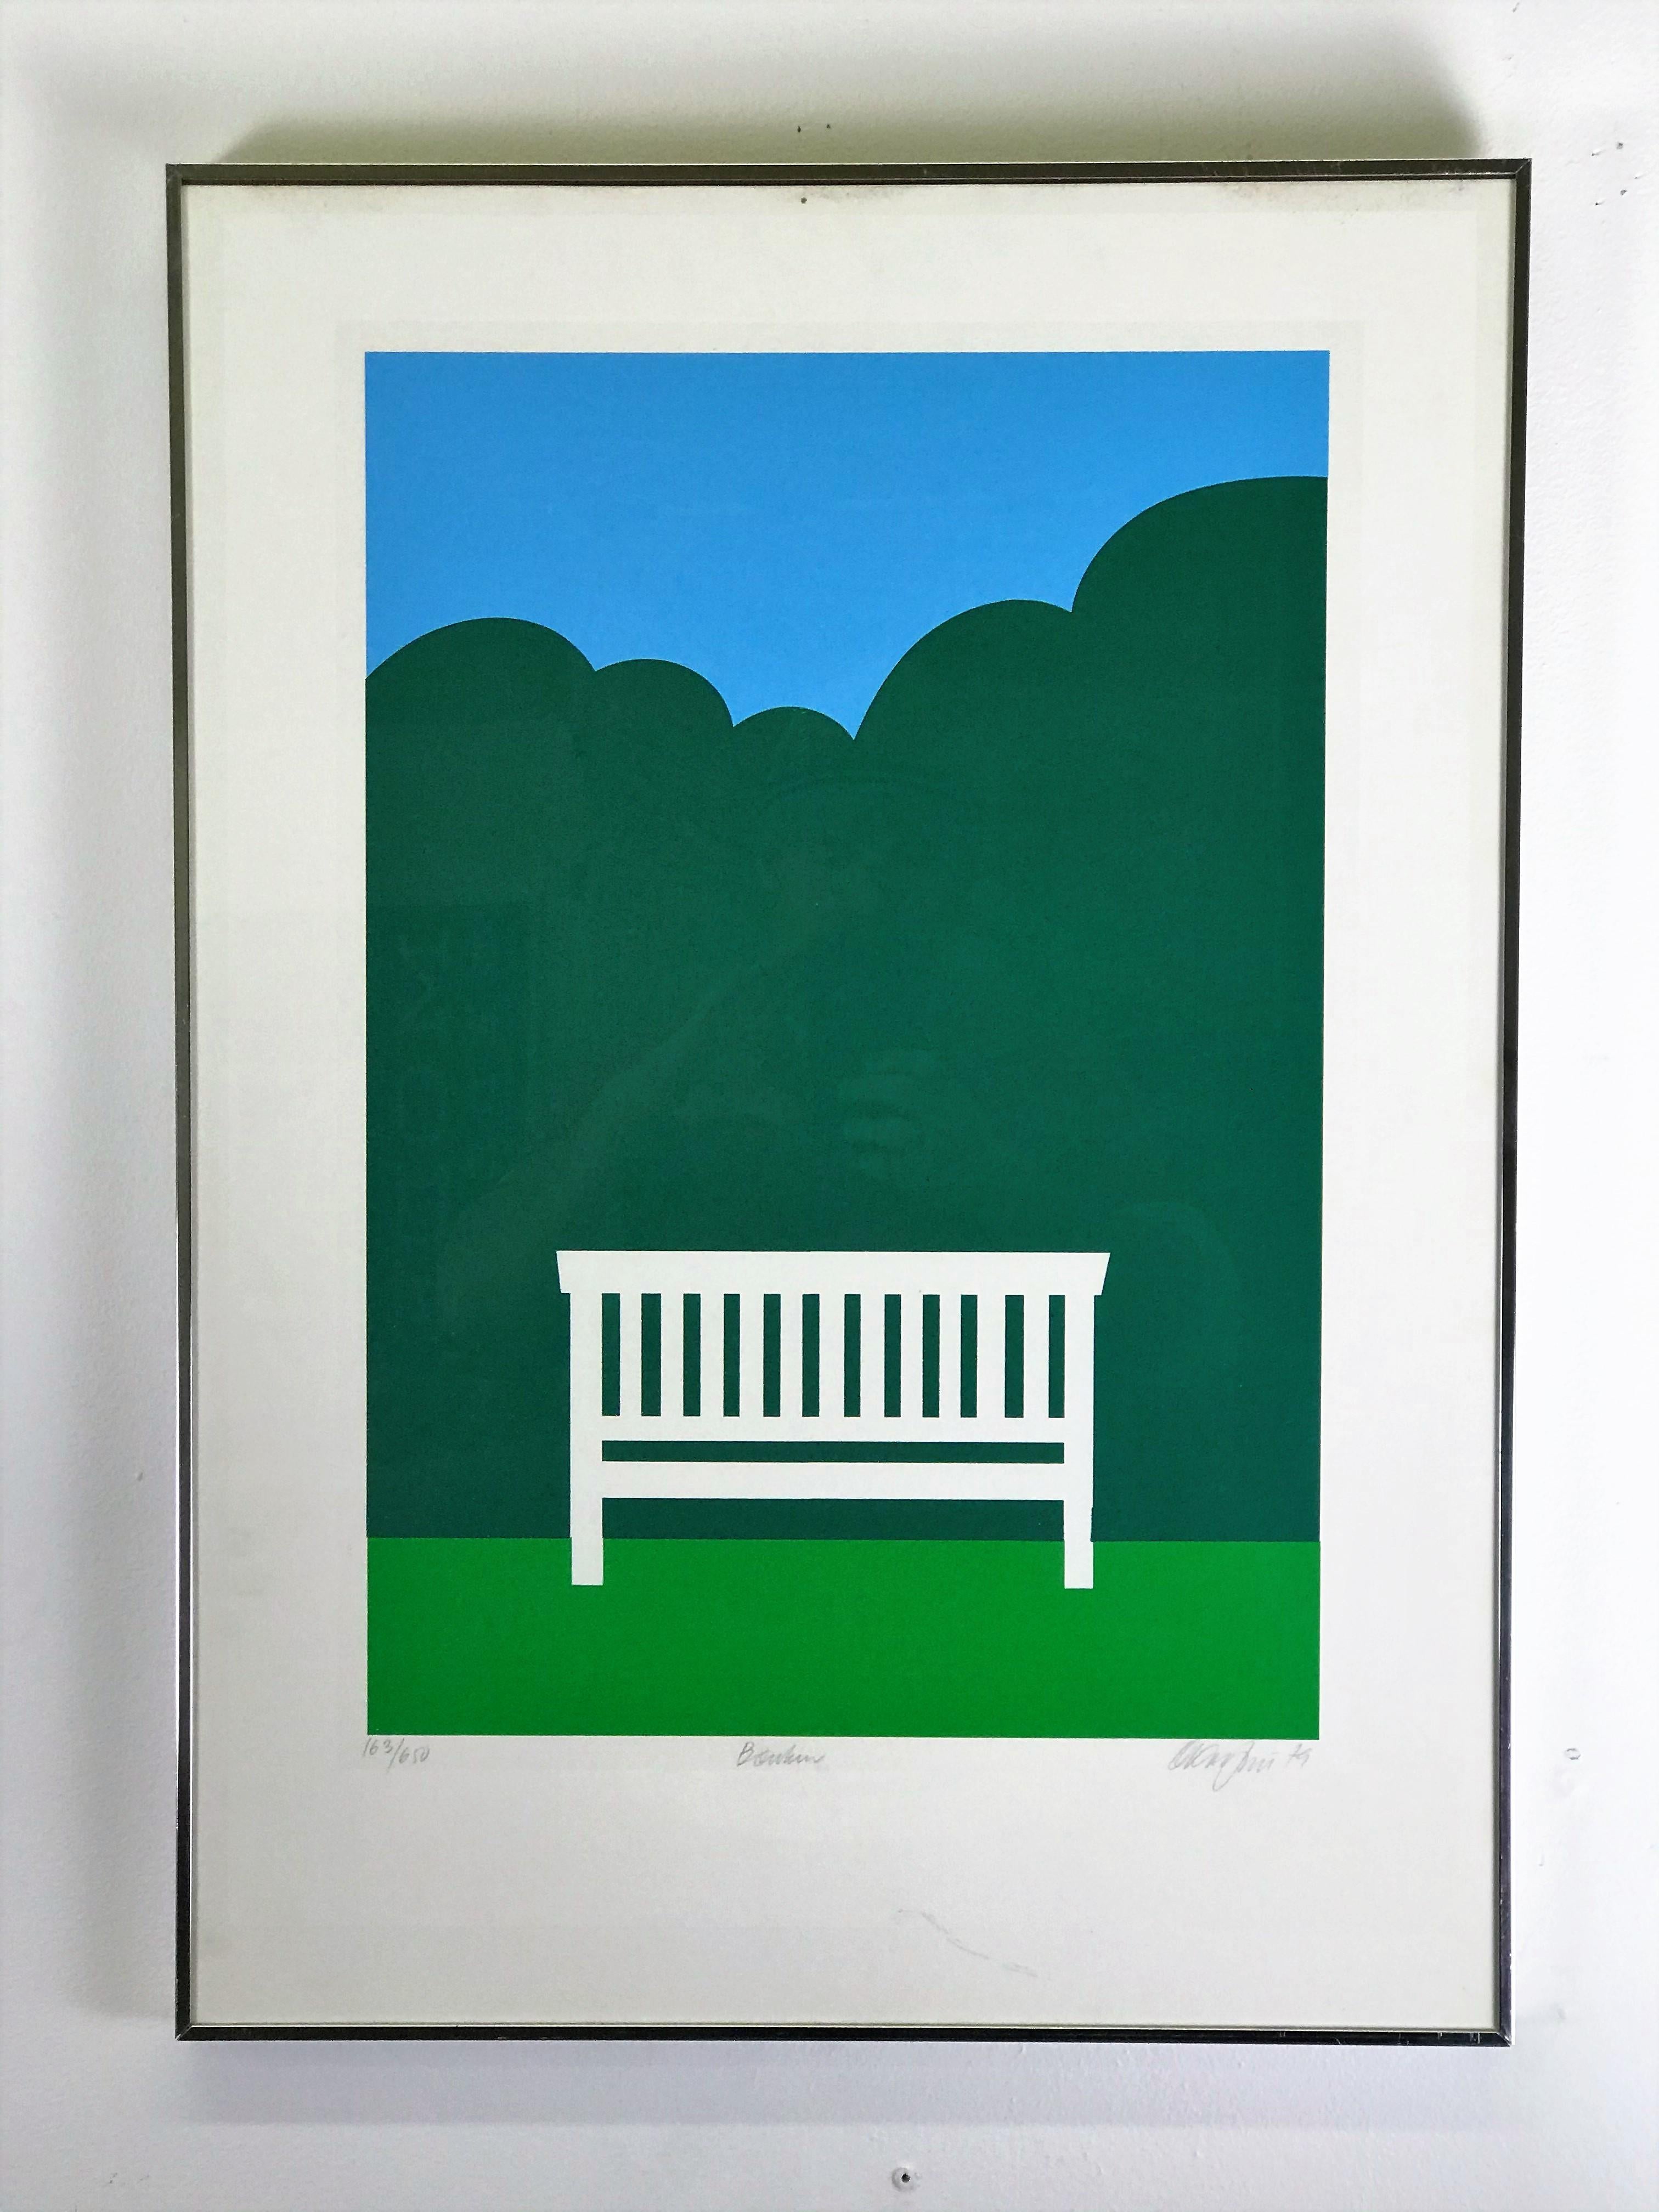 Excellent serigraph by Danish artist Ole Kortzau signed dated '79 and numbered 163/650. “The Bench” 

Excellent color with minor dirt under the frame at the top - photographed.
Measures: 27.5